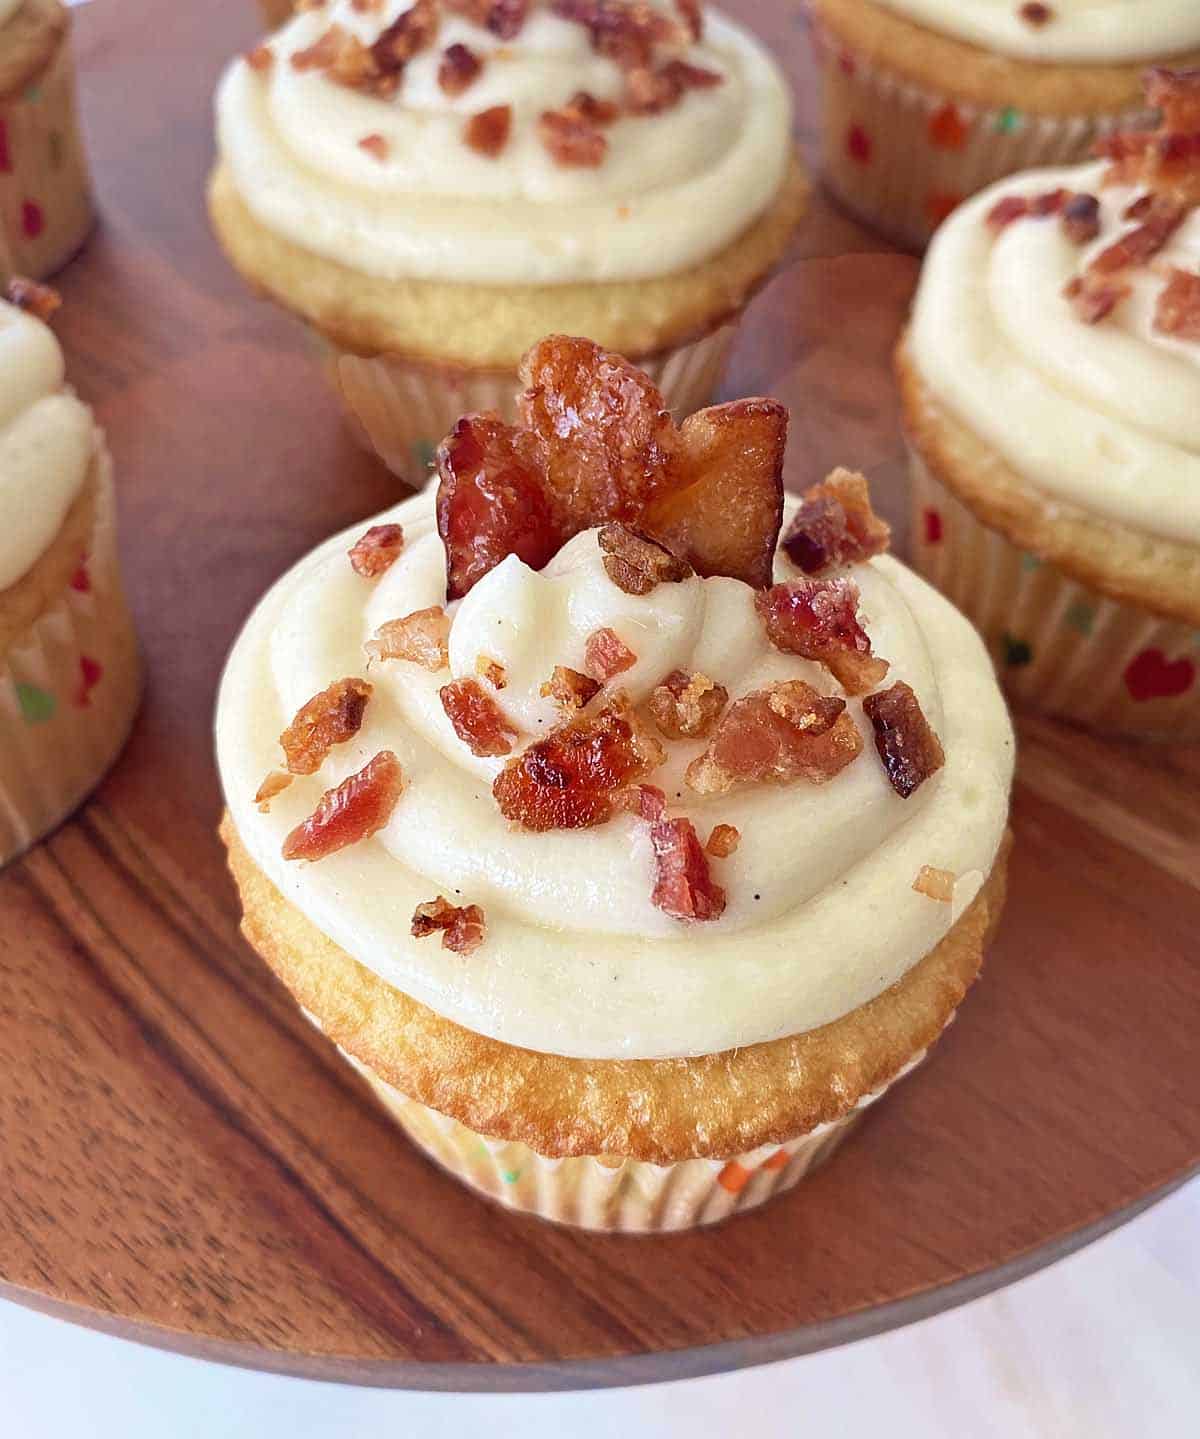 A finished maple bacon cupcake with vanilla buttercream frosting and candied bacon garnish on a wooden cake stand, with more cupcakes in the background.